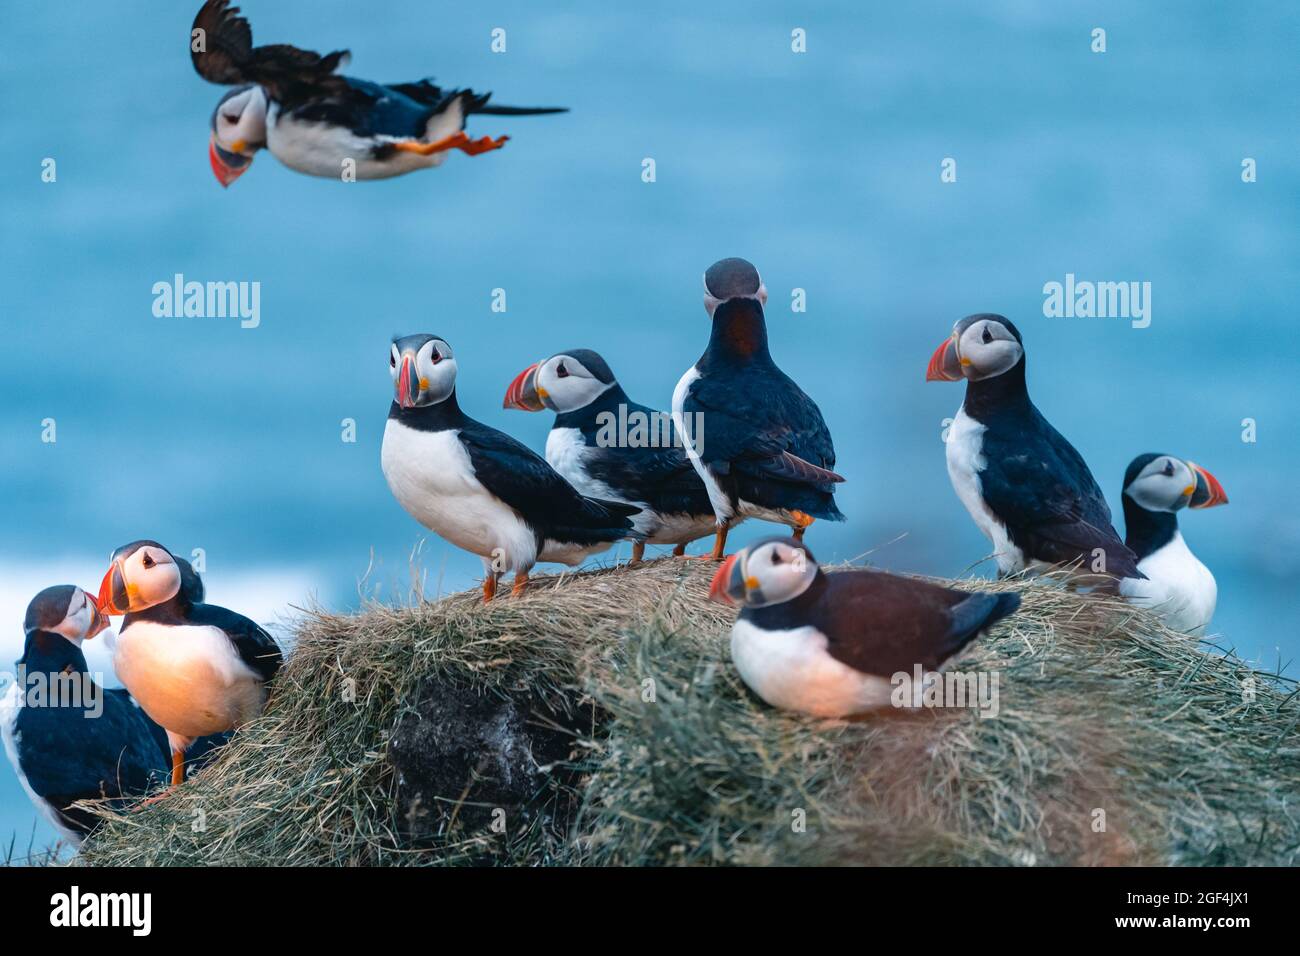 Atlantic puffin also know as common puffin is a species of seabird in the auk family. Iceland, Norway, Faroe Islands, Newfoundland and Labrador in Stock Photo